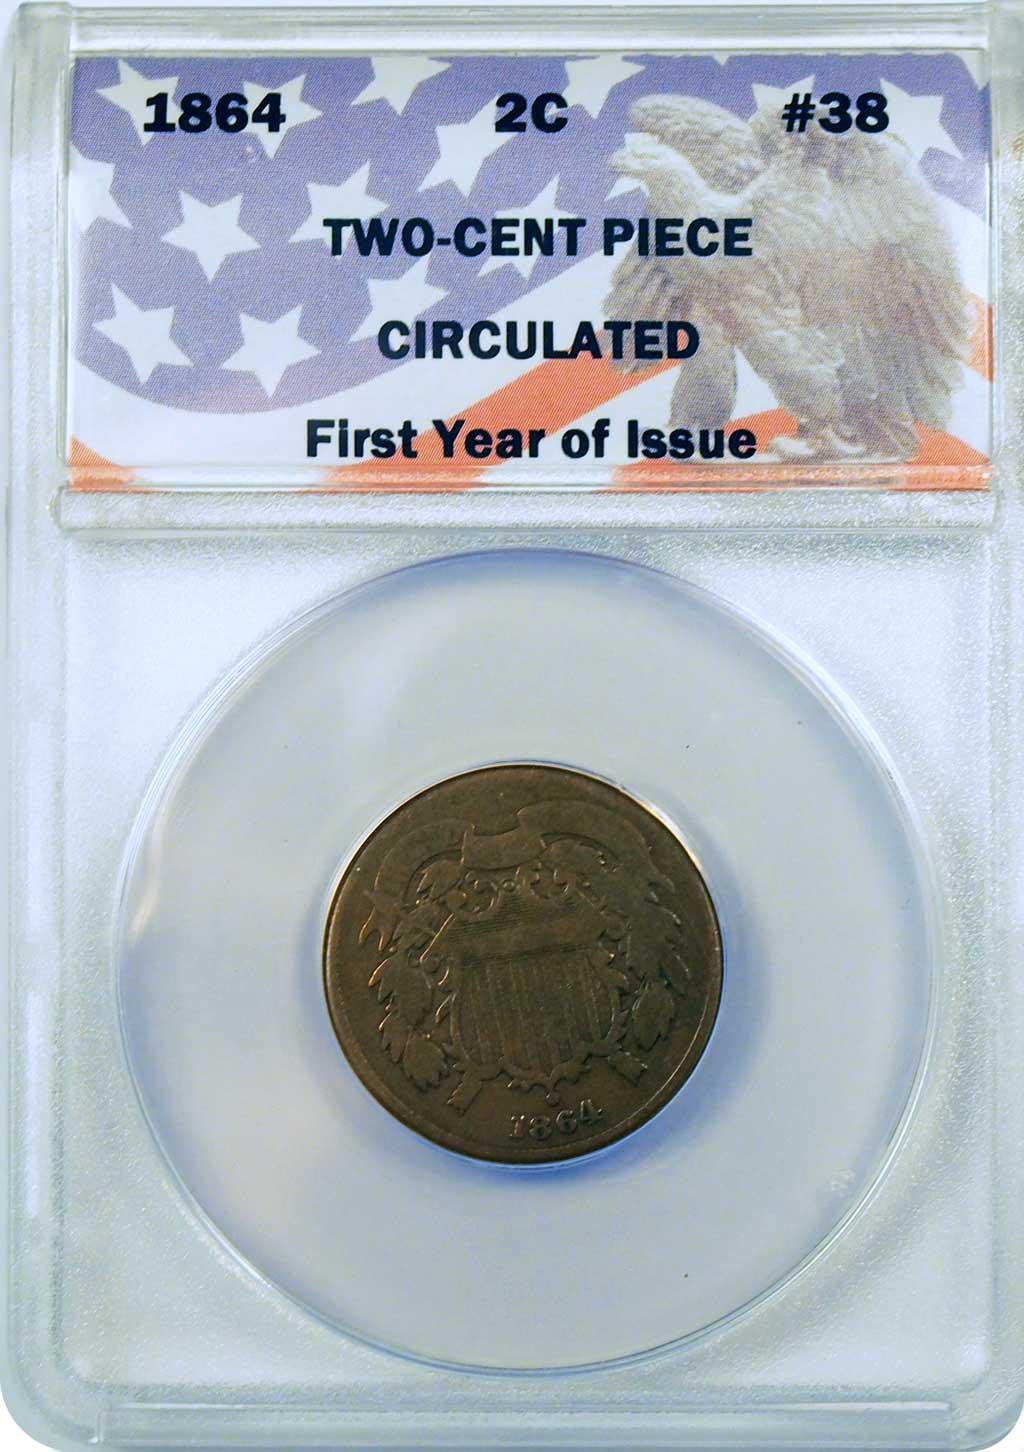 CollecTons Keepers #38: 1864 Two-Cent Piece Certified in Exclusive ANACS Holder